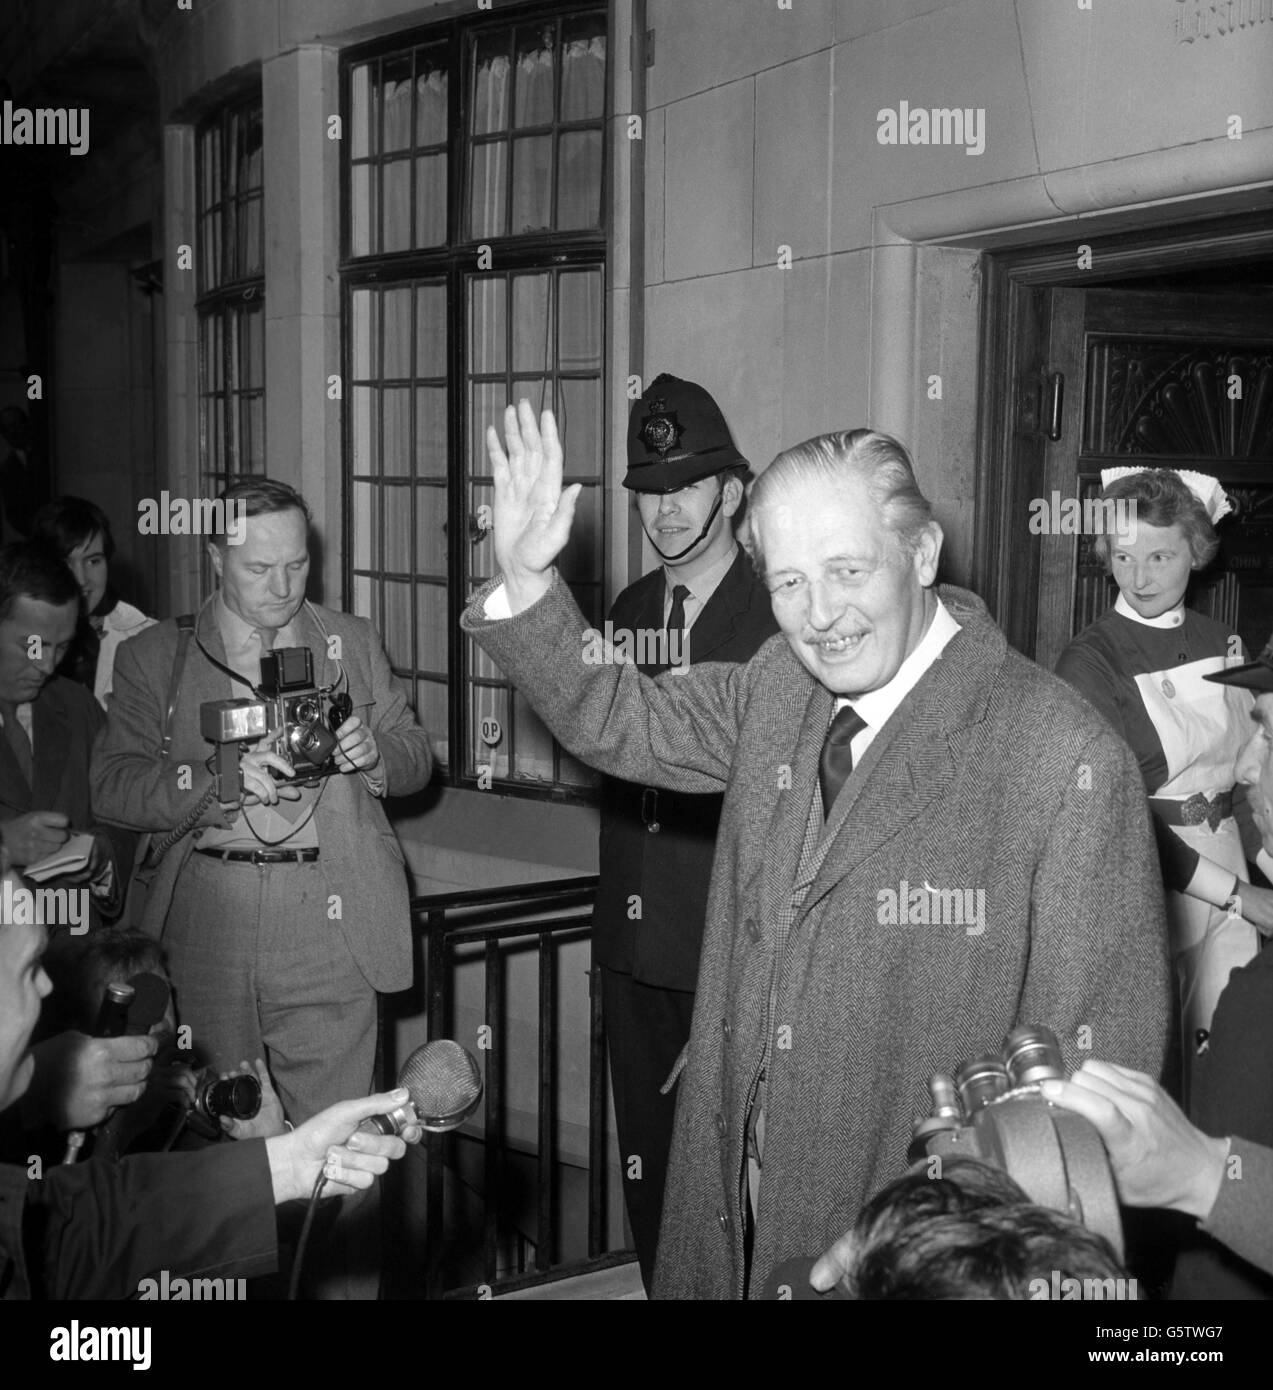 Harold Macmillan, the former Prime Minister, waves as he leaves the car on arriving at the King Edward VII Hospital in Marylebone, London, after going for a drive with his wife, Lady Dorothy Macmillan. On his return to the hospital, Mr Macmillan was taken inside in a wheelchair. He is recovering from a prostate gland operation. Stock Photo